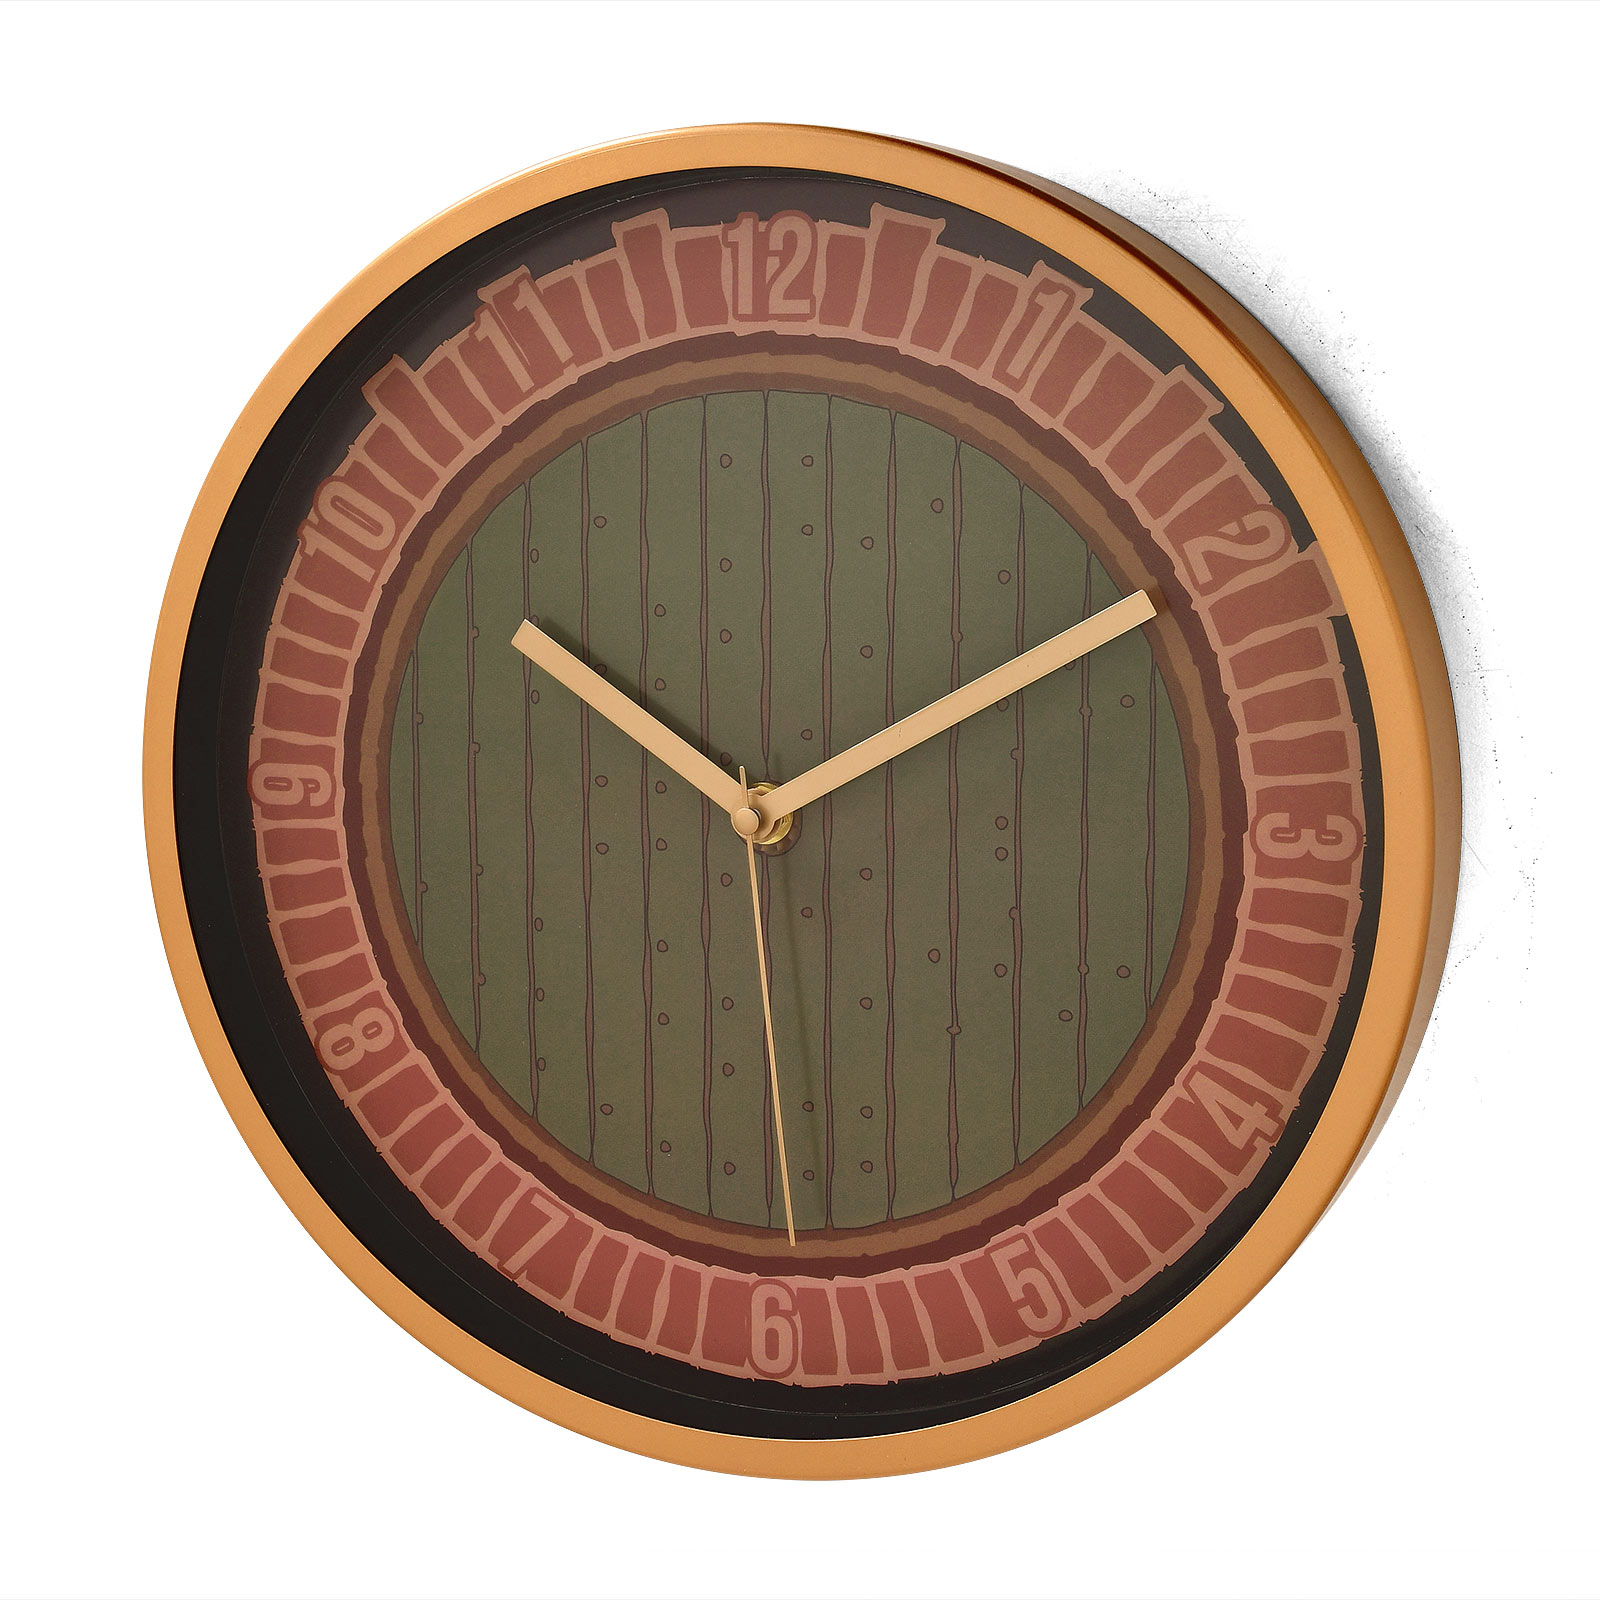 Lord of the Rings - Hobbit Hole Wall Clock